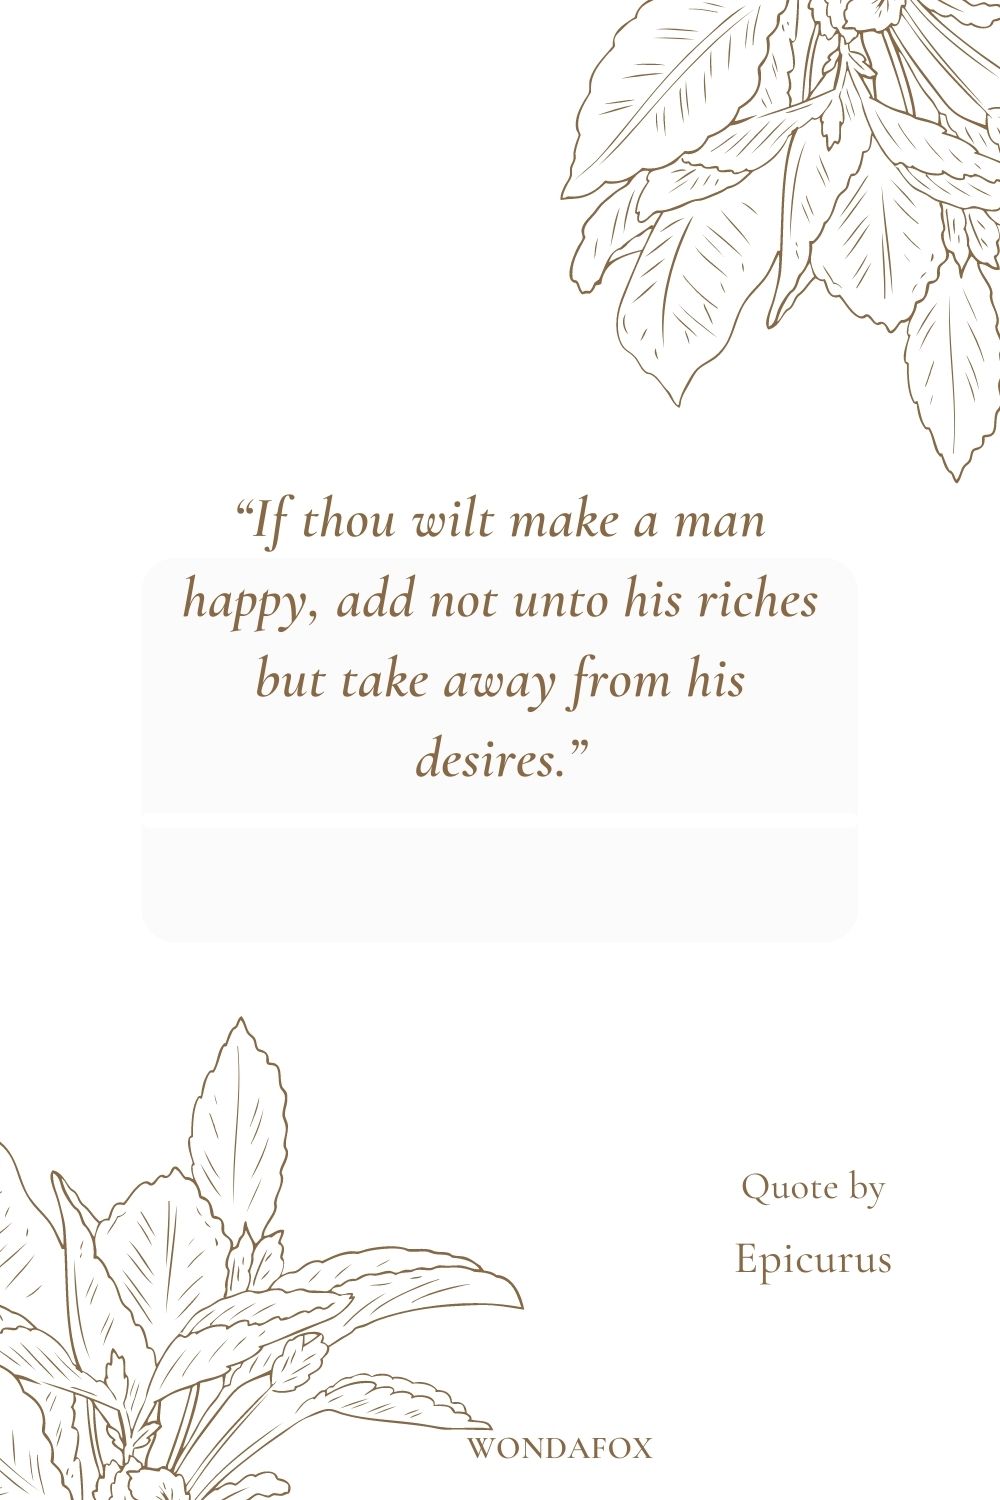 “If thou wilt make a man happy, add not unto his riches but take away from his desires.”
Epicurus